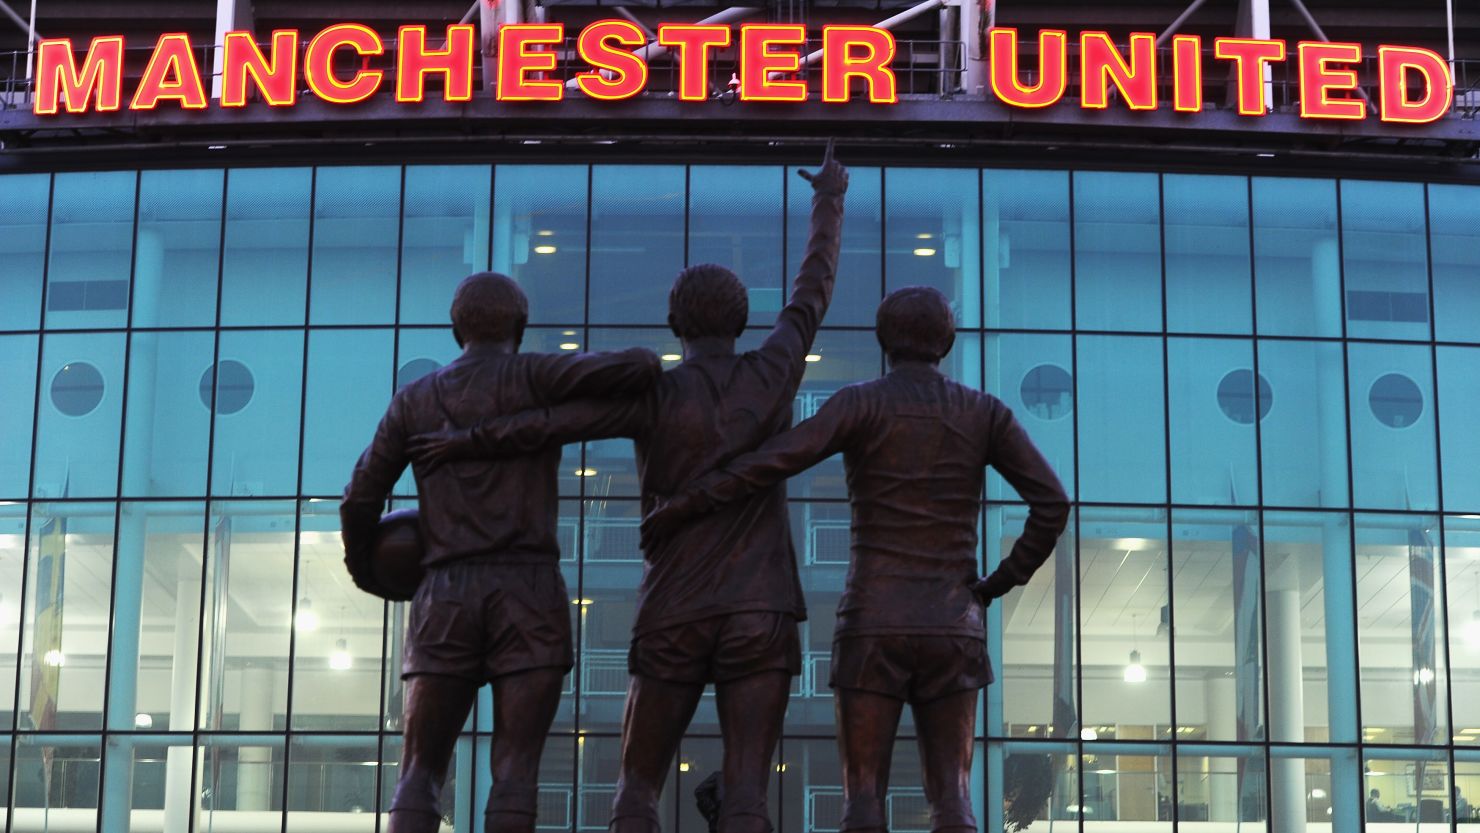 Shares in Manchester United start trading on the New York Stock Exchange on Friday under the symbol MANU. (File)